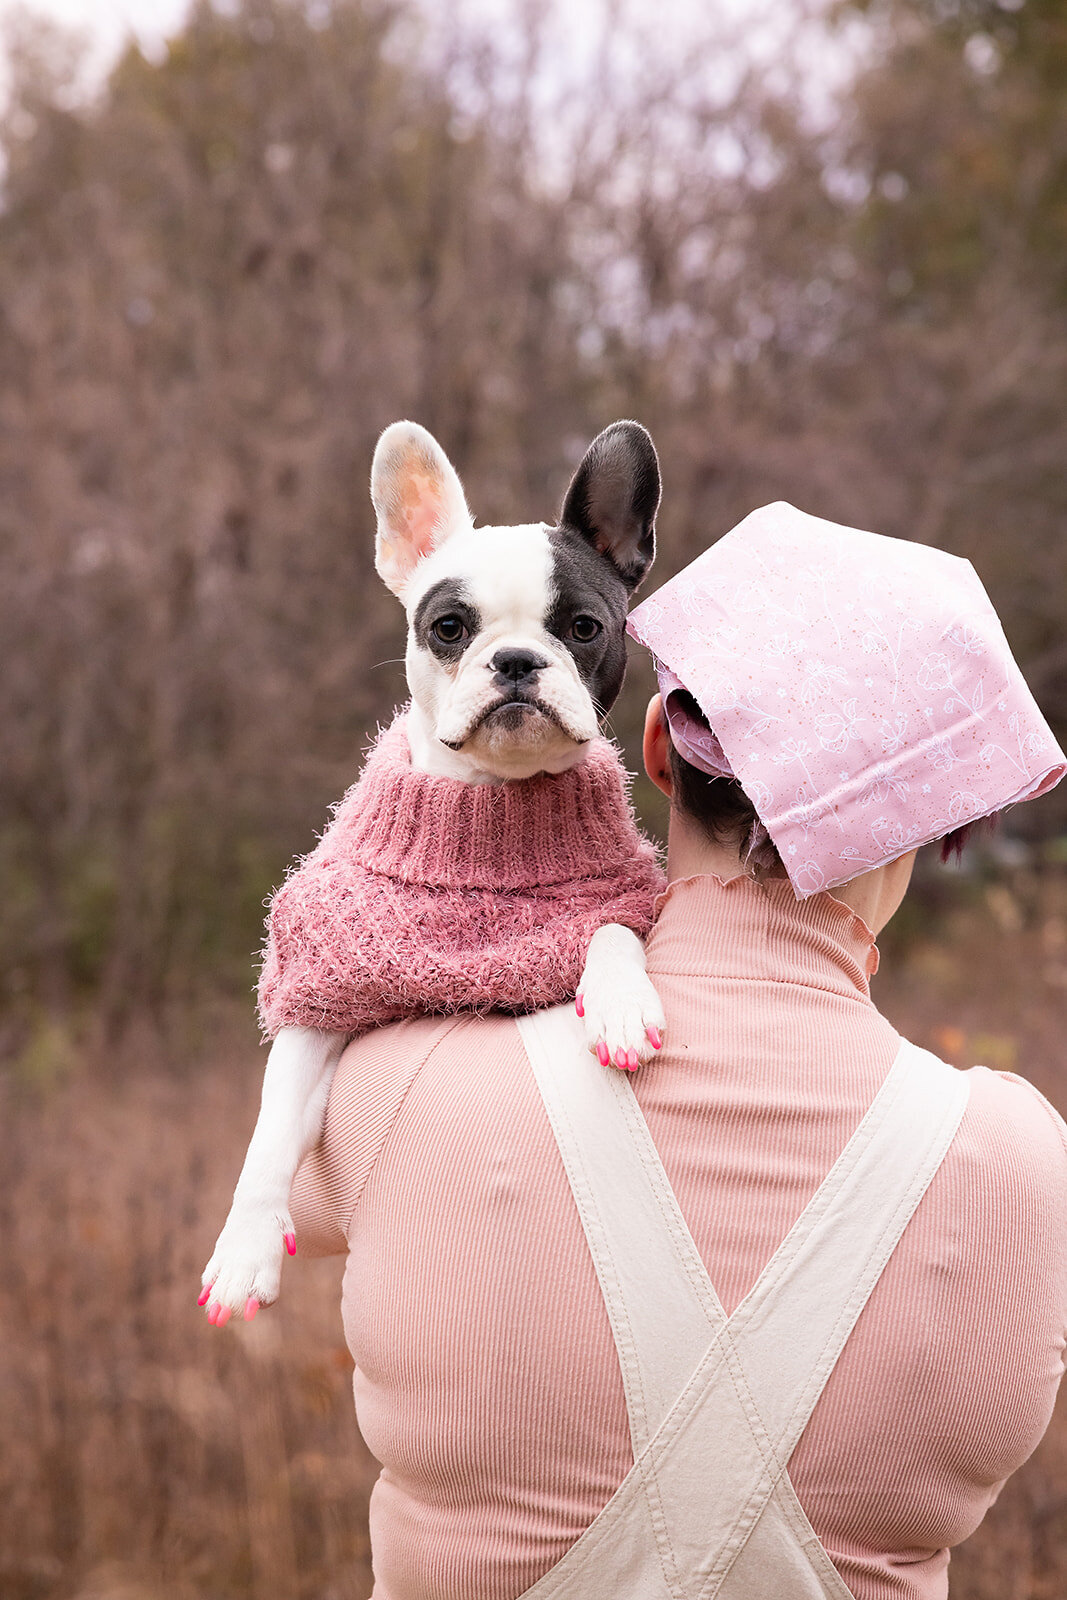 Dog on mama's shoulder looking at camera with pink sweater